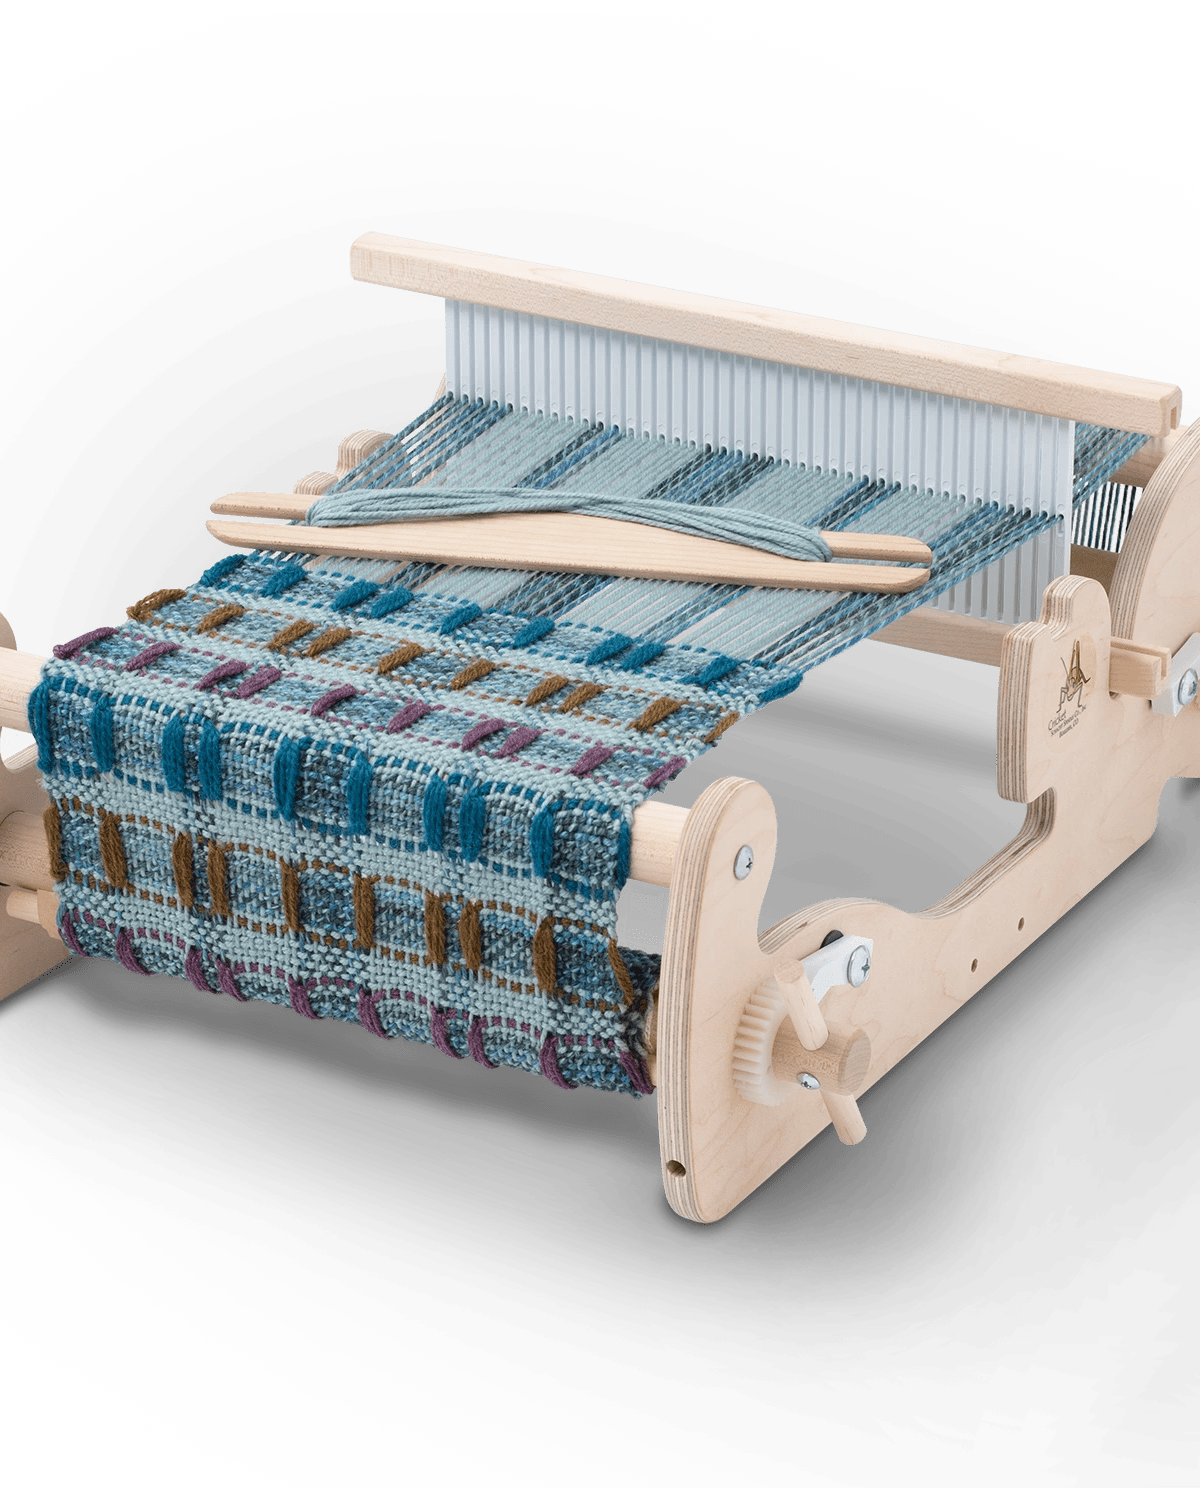 Schacht Spindle Company Weaving Looms 10" Schacht Cricket Rigid Heddle Looms